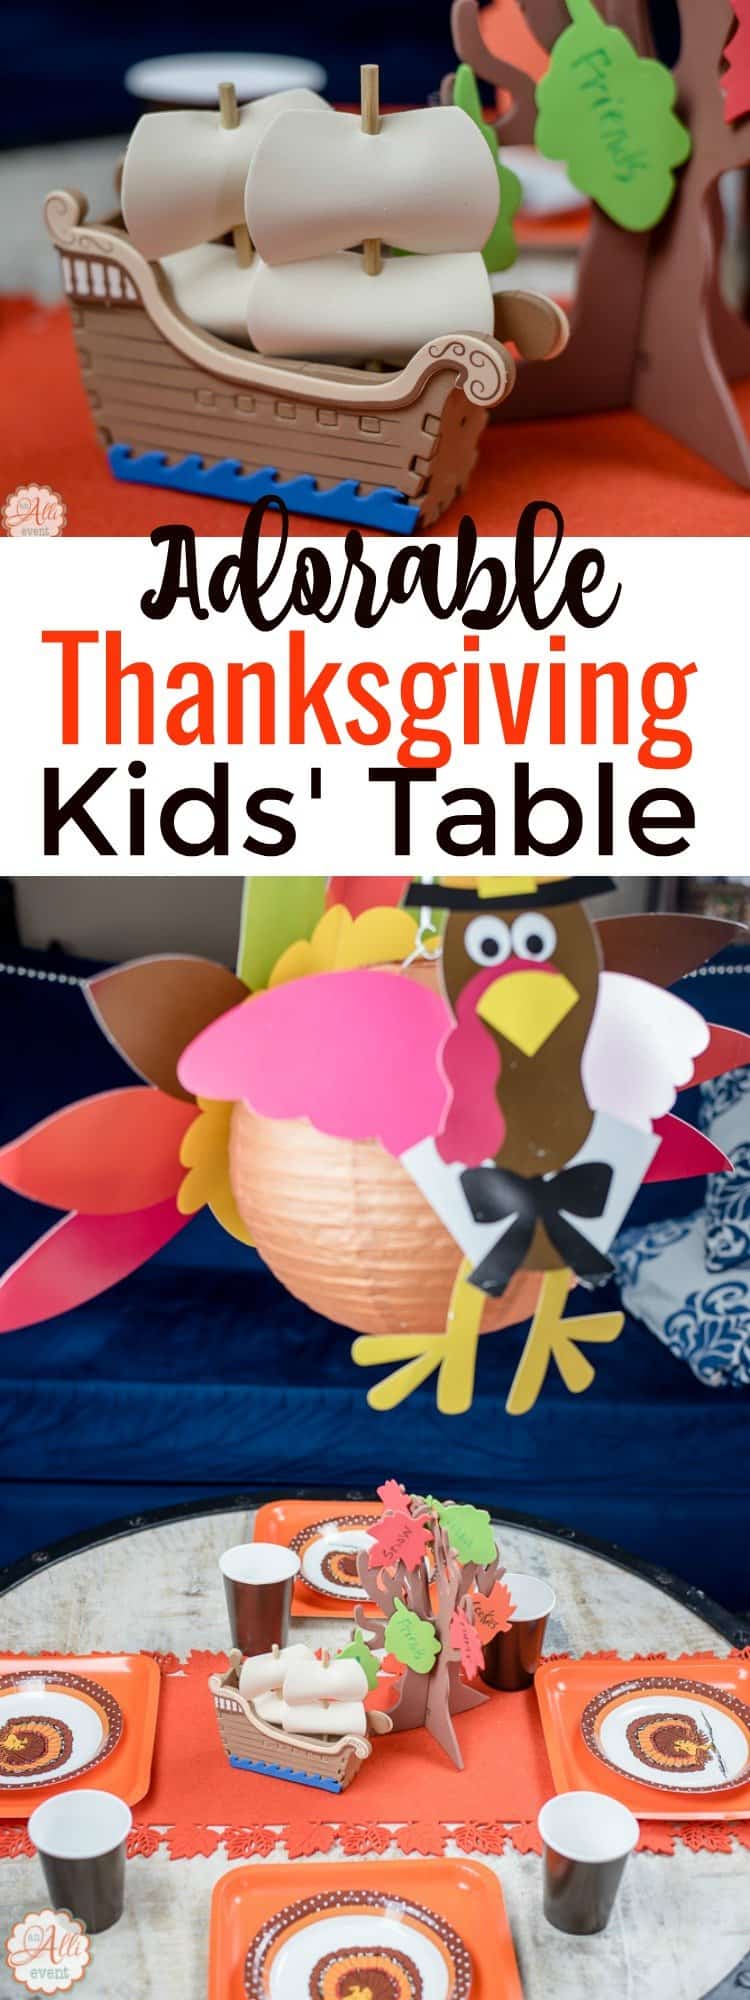 Adorable Thanksgiving Kids Table